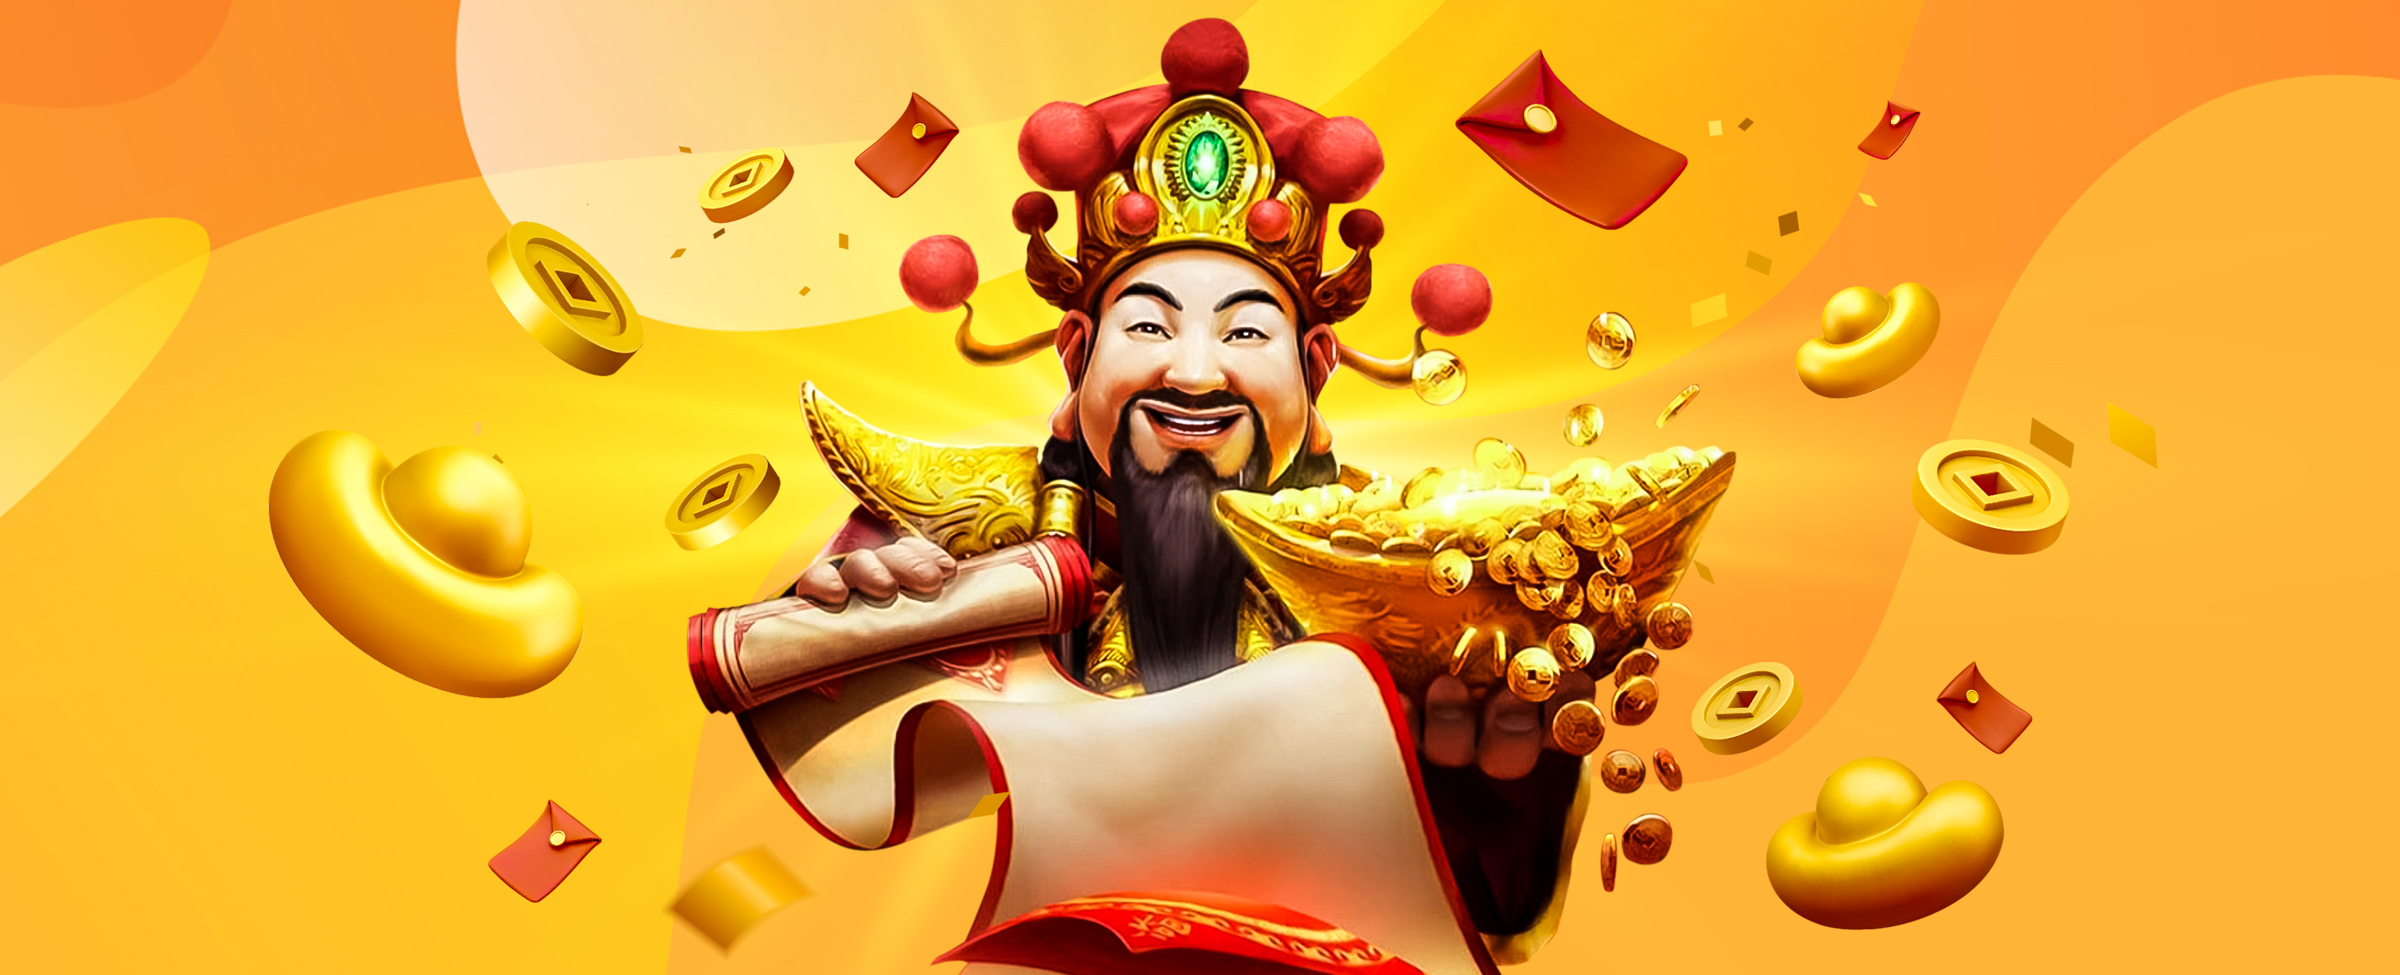 A cartoon character of a Chinese man with a beard and mustache wearing an elaborate hat and holding a scroll in one hand and a golden basket of coins in the other with coins floating around him